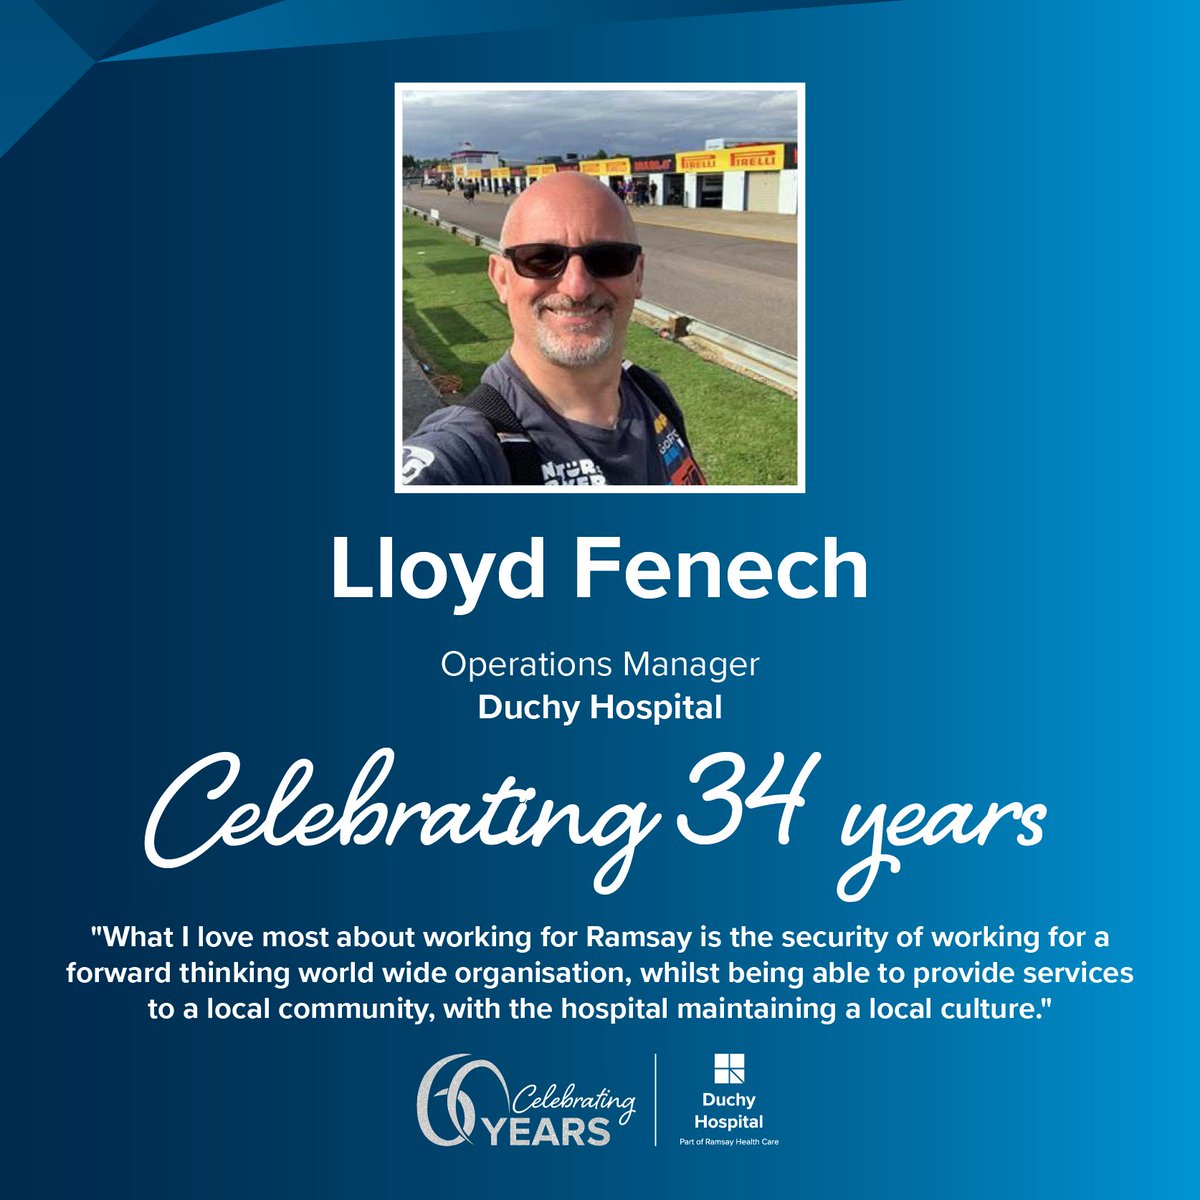 We have interviewed some of our people who form a key part of our success. We speak to Lloyd Fenech, Operations Manager at Duchy Hospital as he celebrates 34 years with Ramsay Health Care UK. Read more: ow.ly/wwN650Ro9Rq